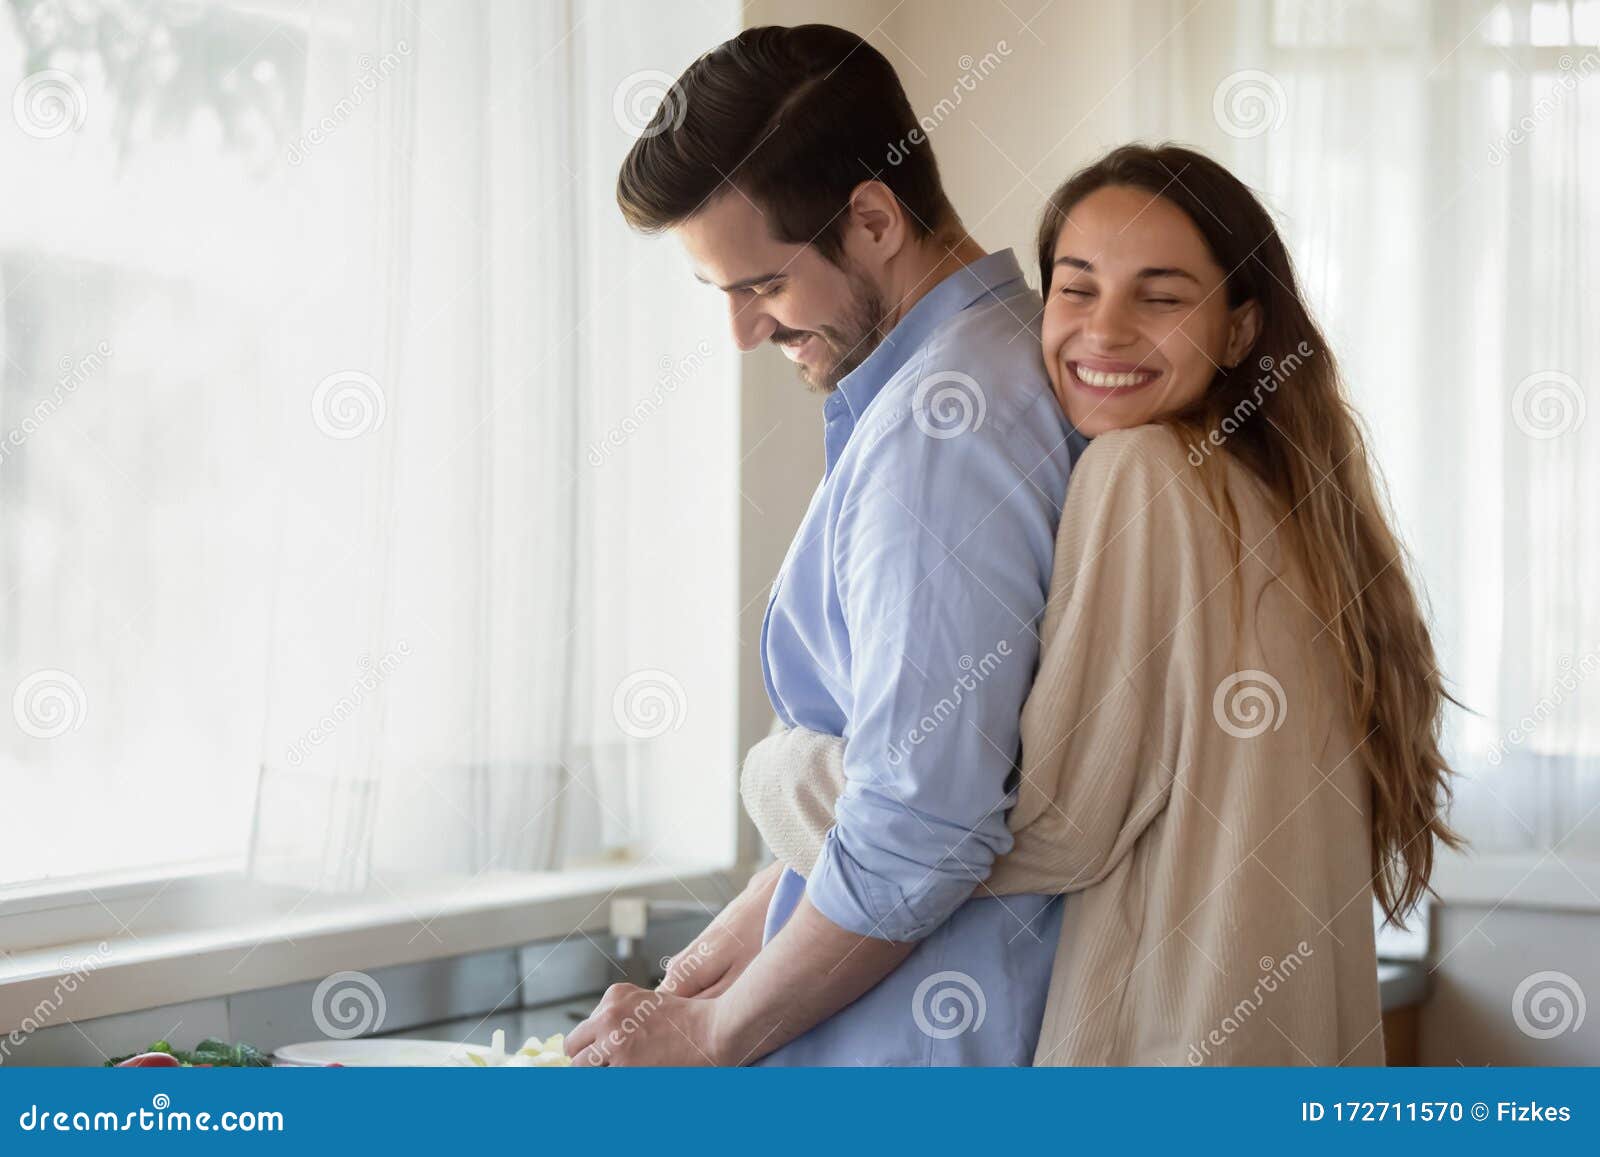 loving young newlyweds cuddle cooking at home together